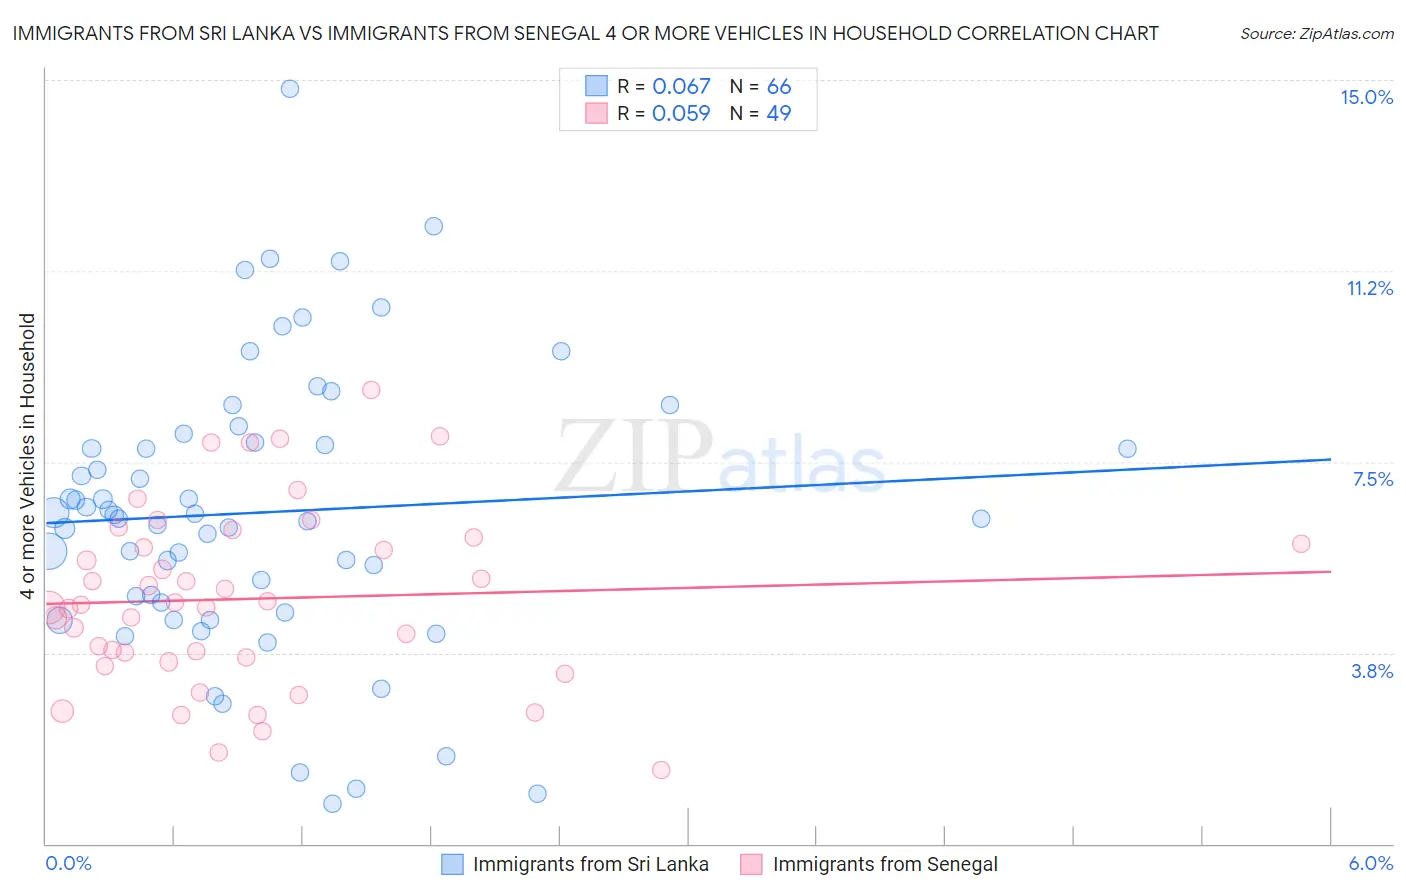 Immigrants from Sri Lanka vs Immigrants from Senegal 4 or more Vehicles in Household